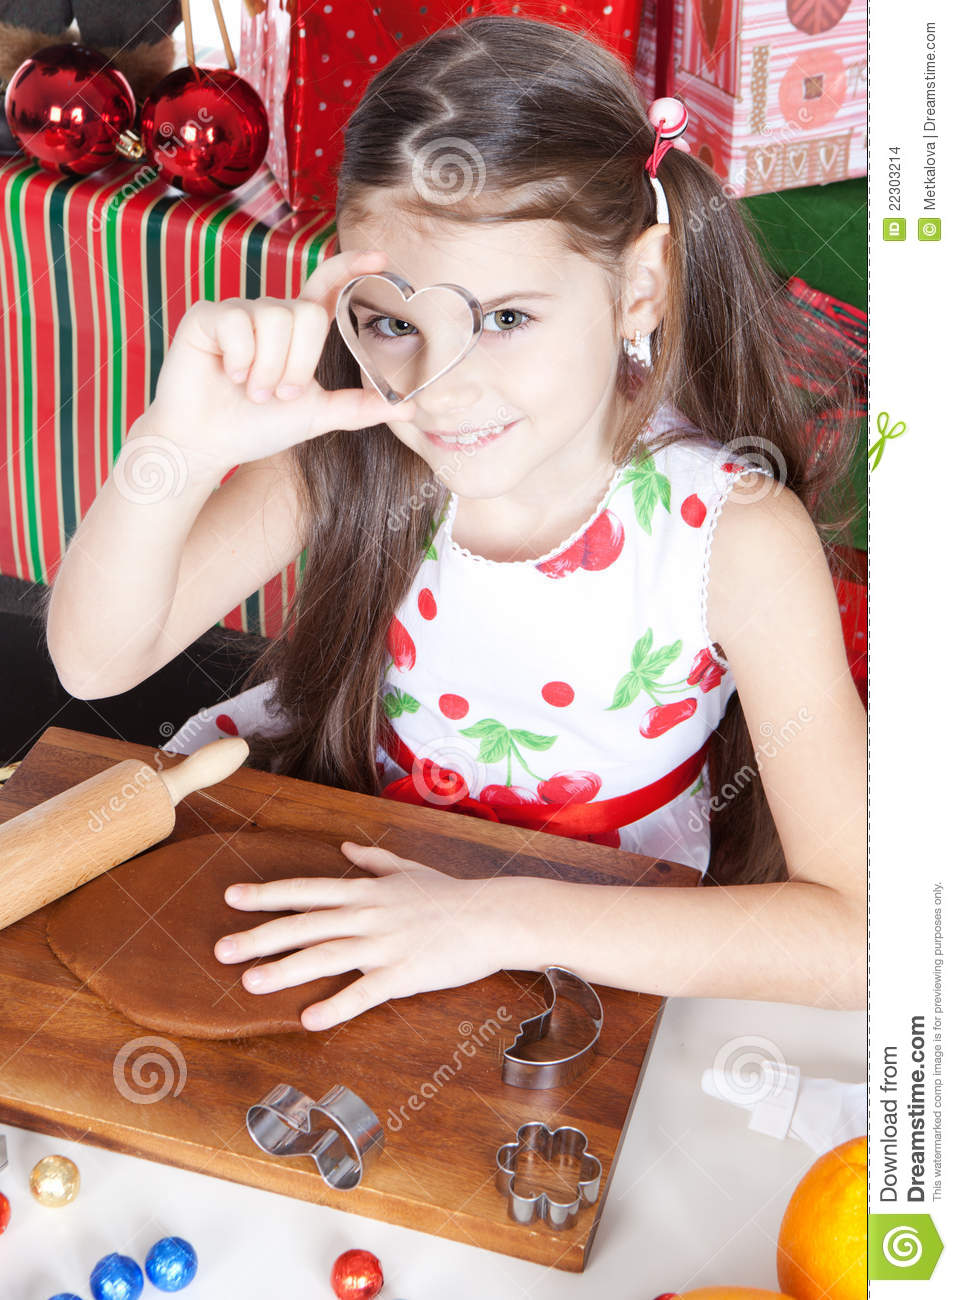 Little Girl Making Christmas Cookies Stock Images   Image  22303214